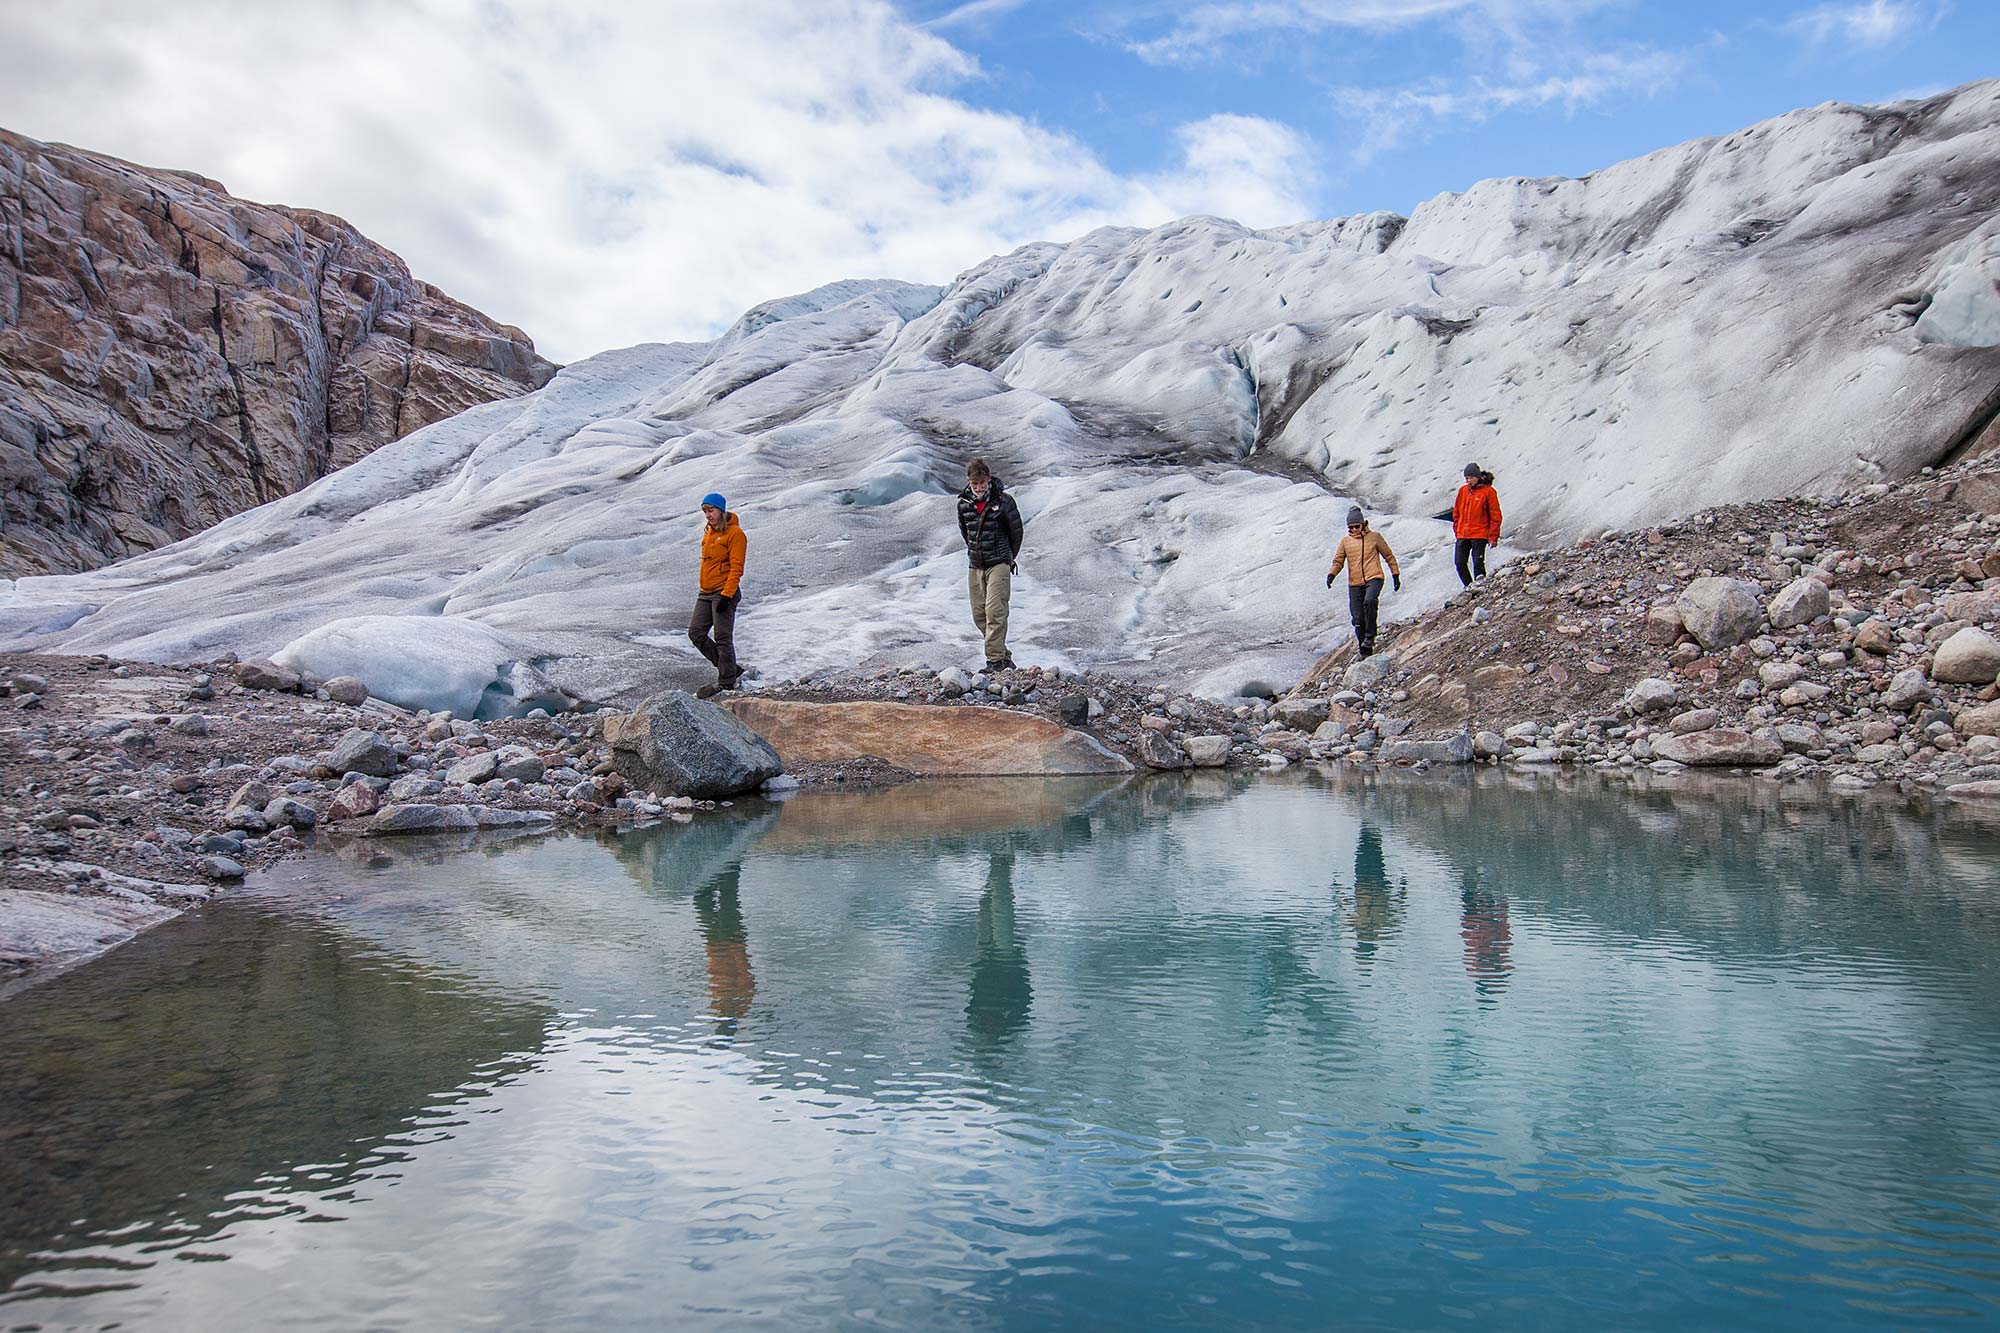 Hike up close to the Glacier, Greenland